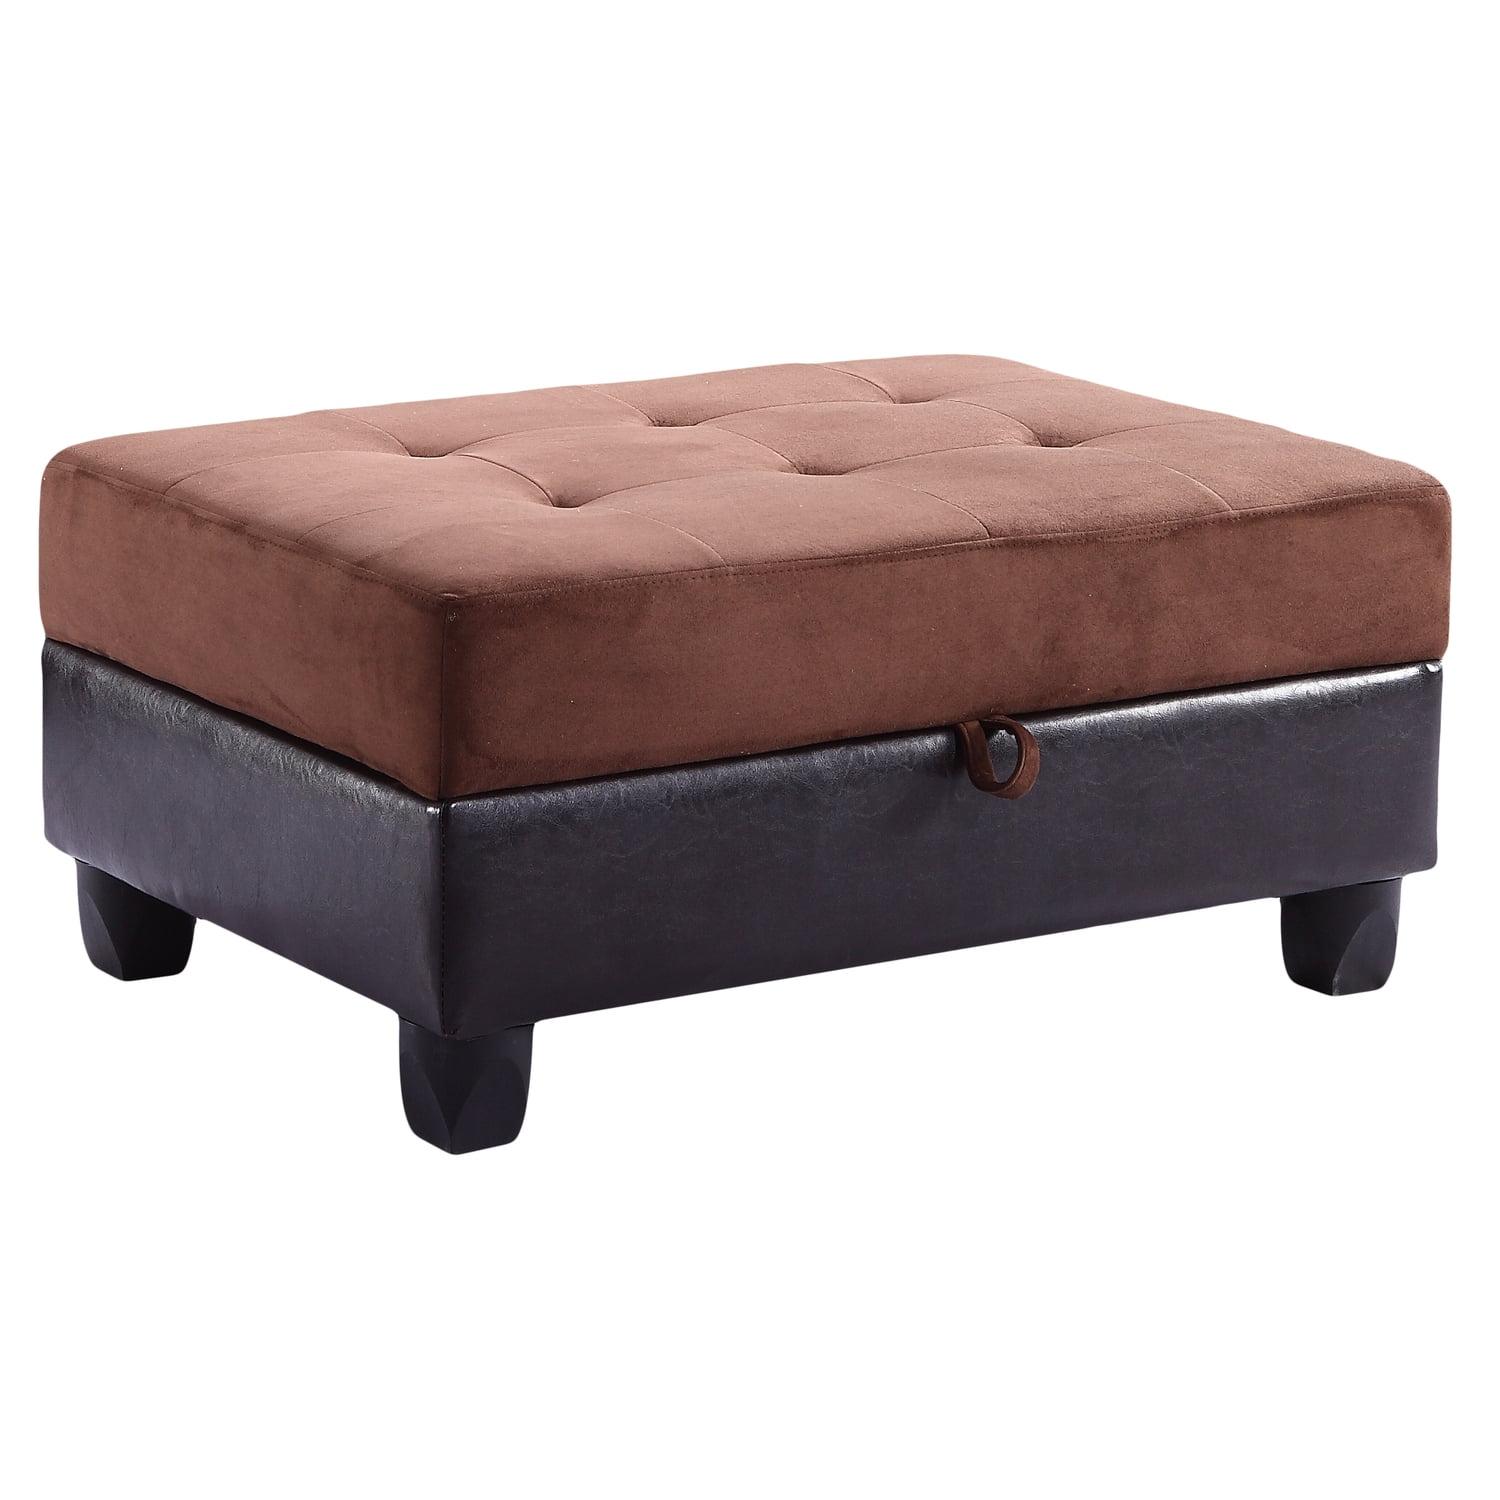 Contemporary Tufted Fabric Storage Ottoman in Chocolate